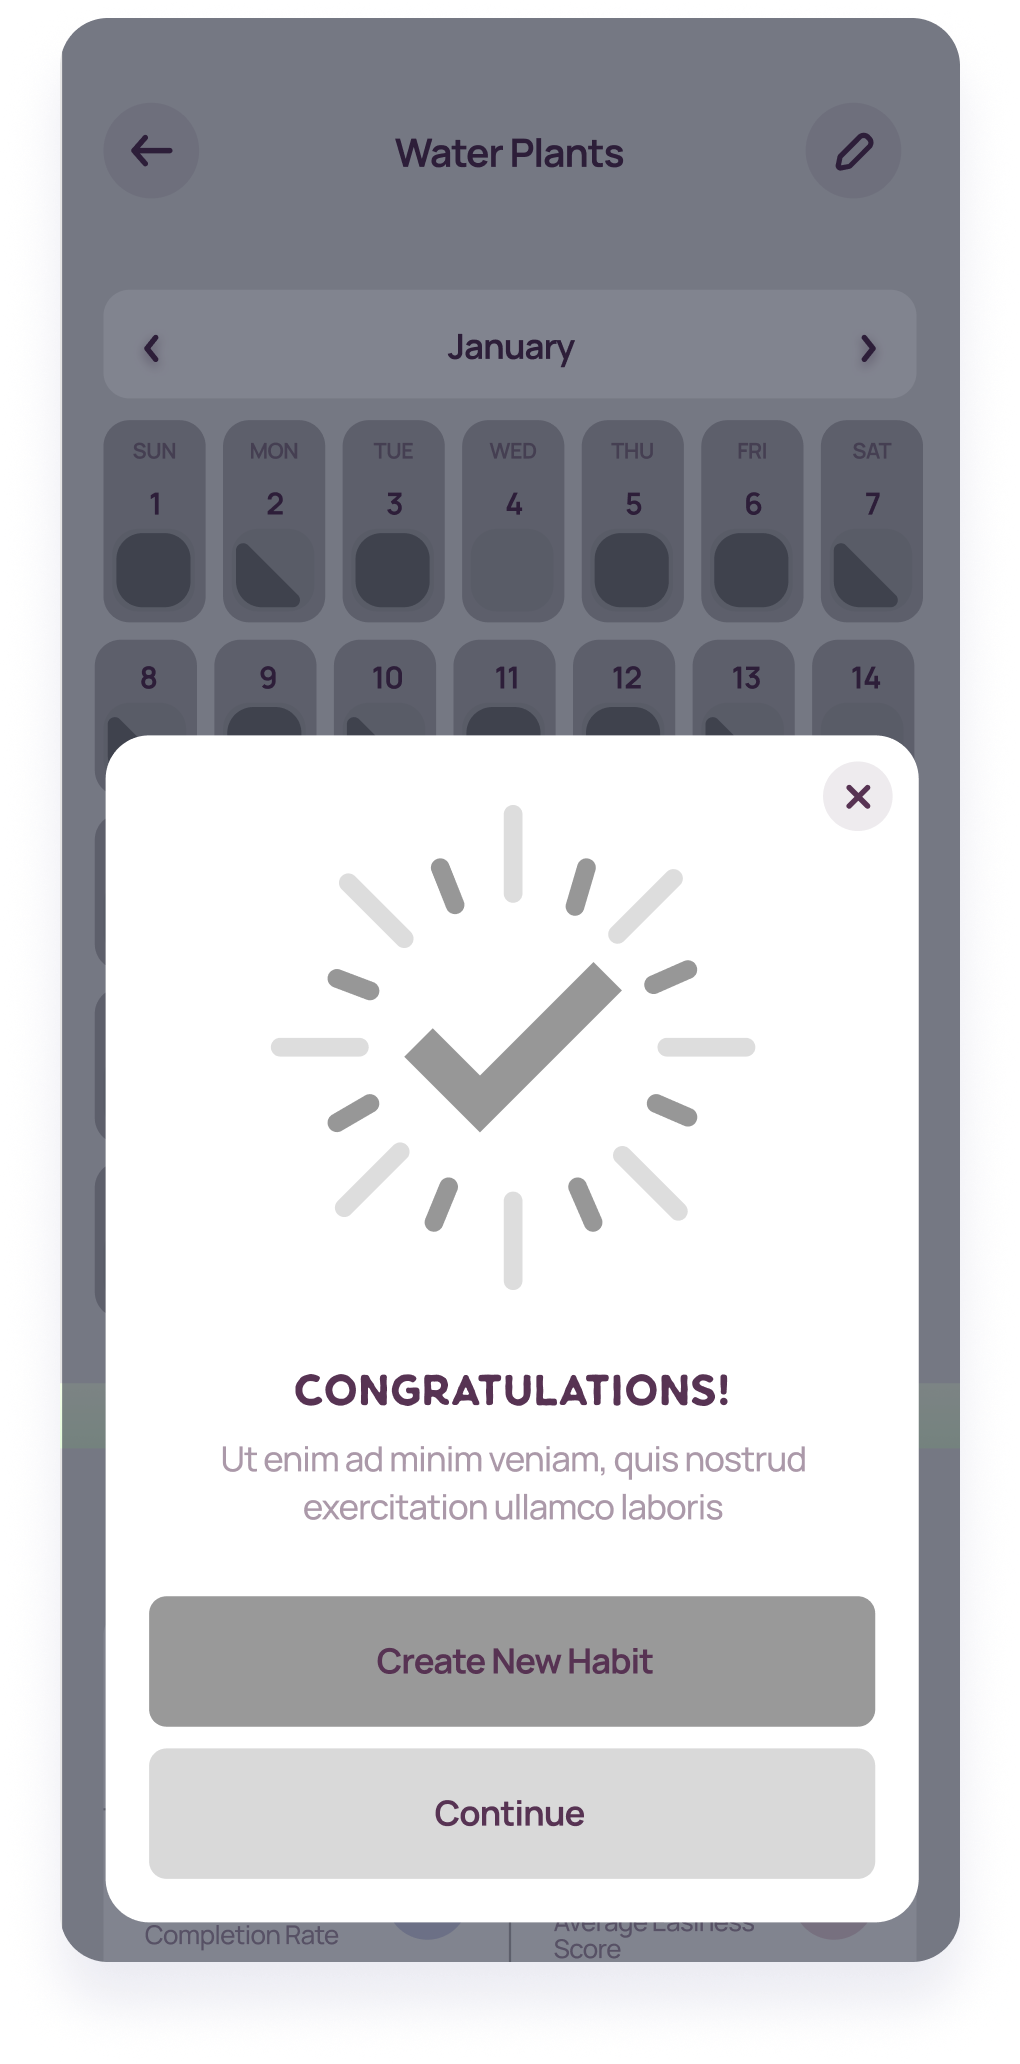  Wireframe of a LifeBalance screen displaying a congratulatory message for completing a habit